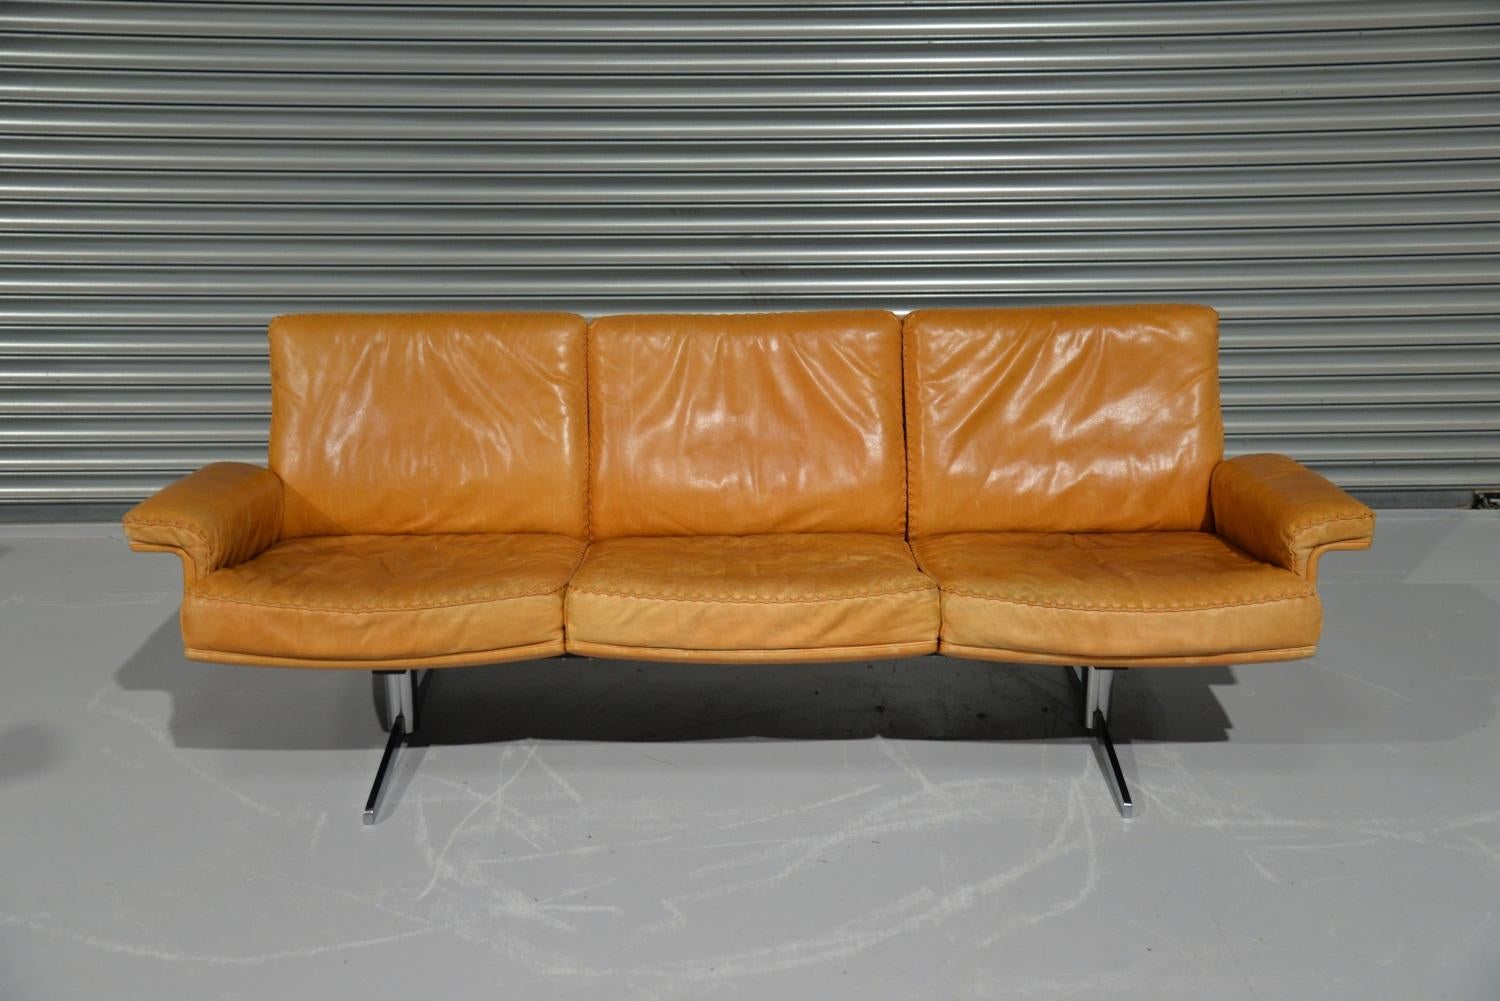 Discounted airfreight for our US Continent customers (from 2 weeks door to door)

We are delighted to bring to you a highy desirable vintage De Sede DS 35 three-seat sofa. Hand built in the late 1960s by De Sede craftsman in Switzerland, this rare